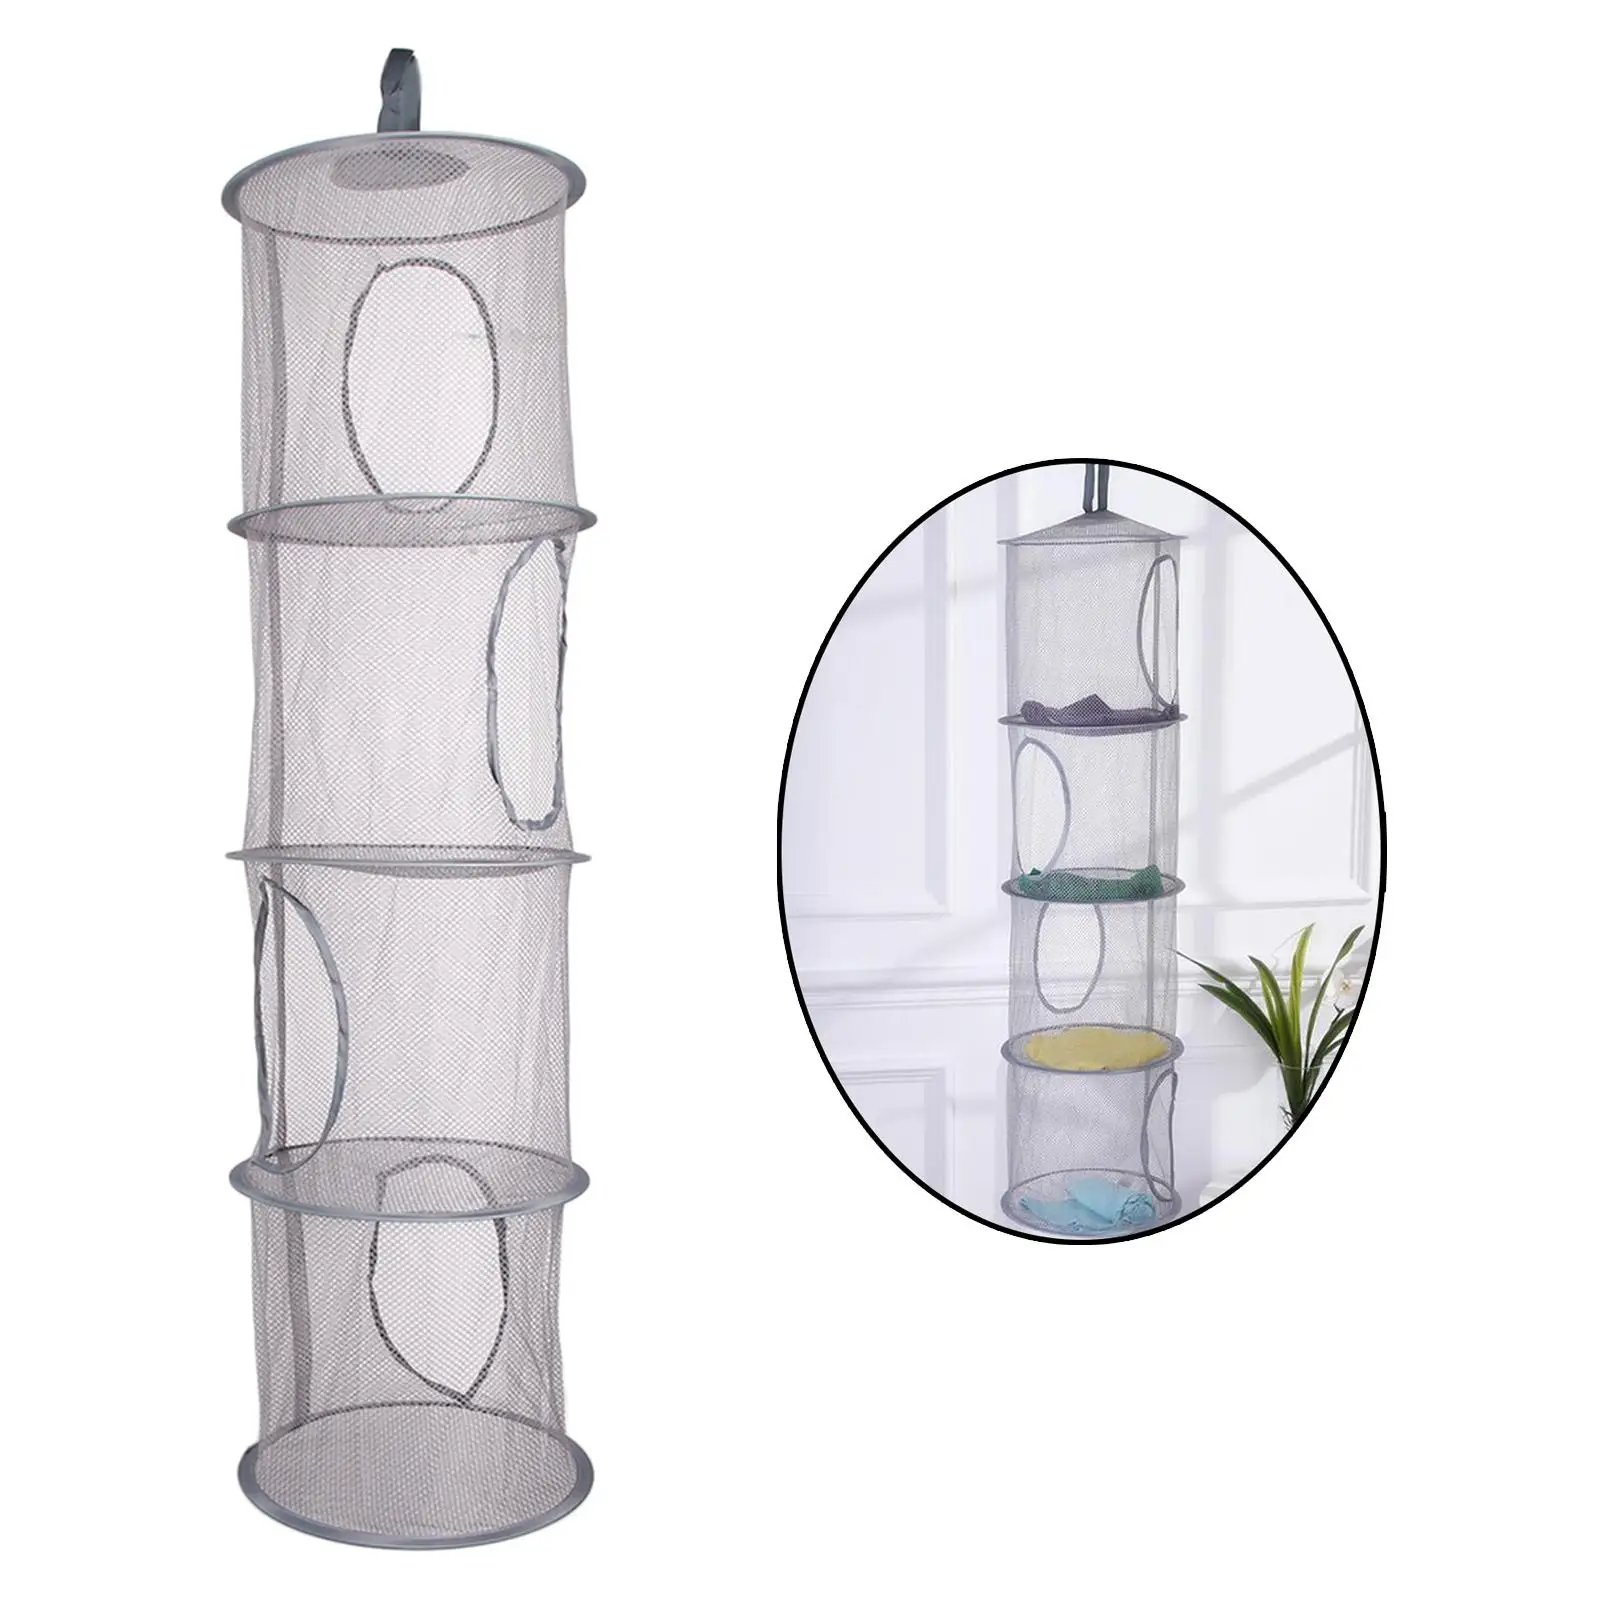 Hanging Space Saver Bags Elastic ing Basket Multifunctional 4 Compartments